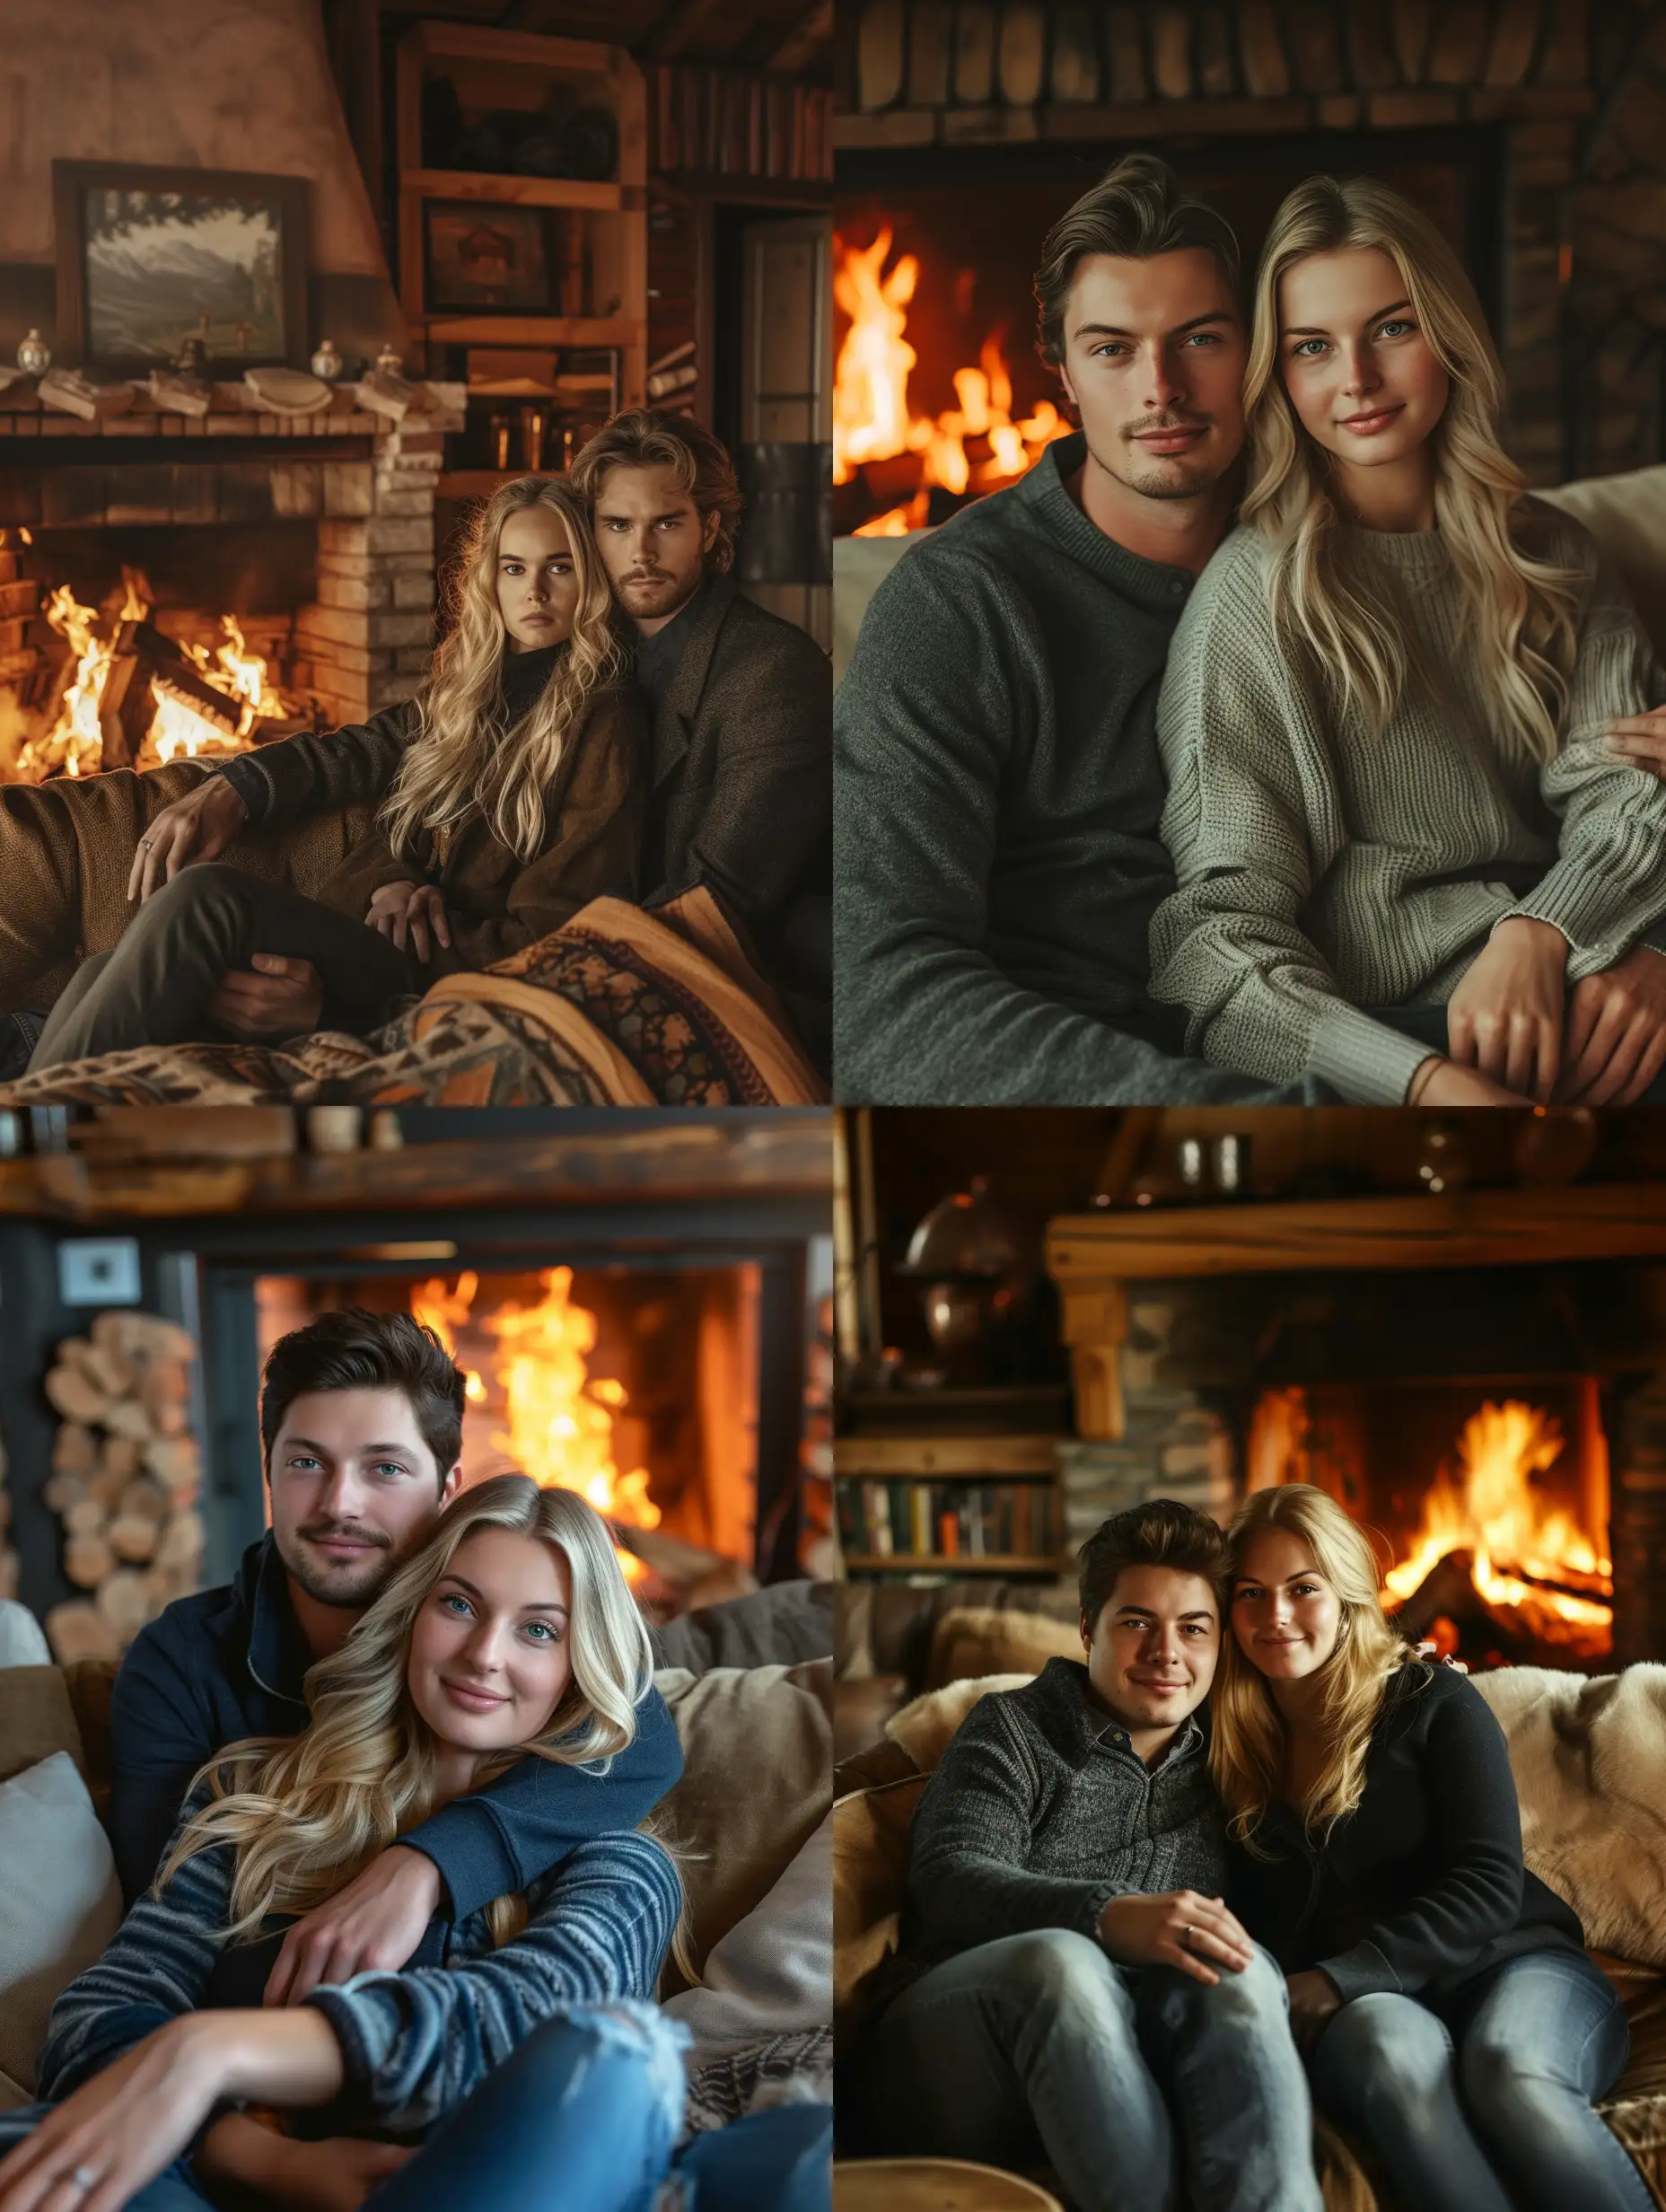 Couple-in-Cozy-Romantic-Setting-by-Burning-Fireplace